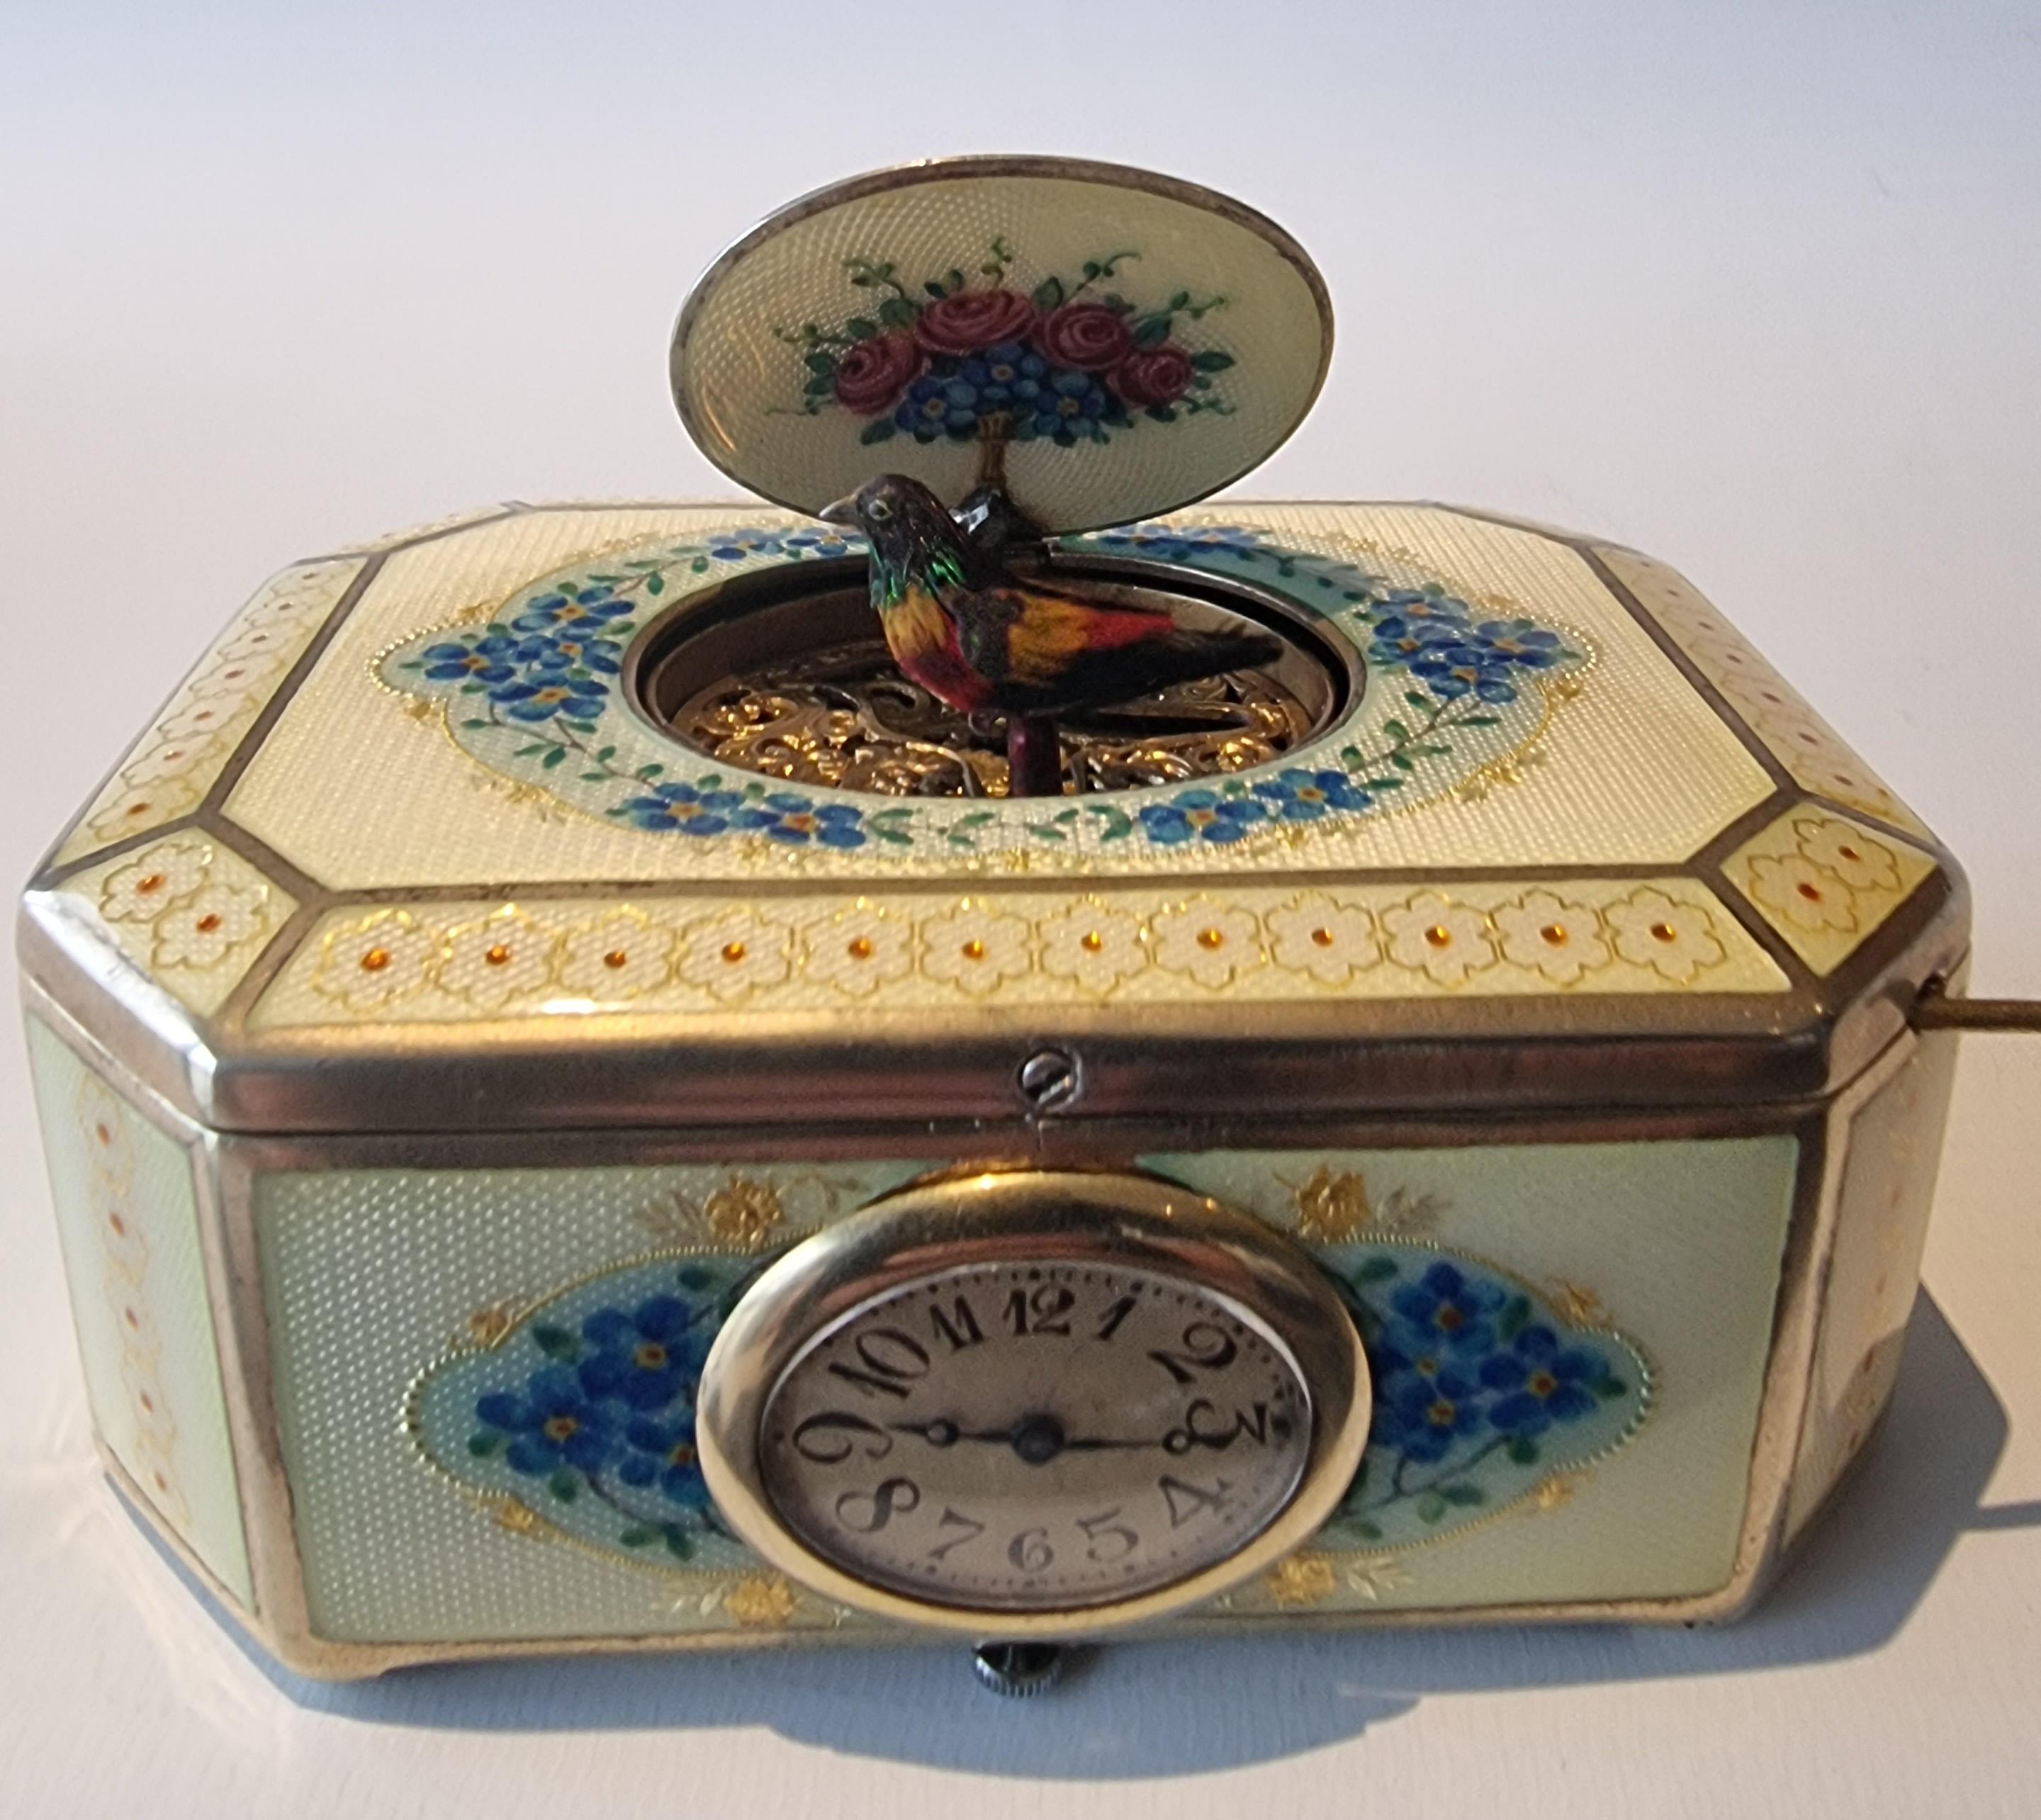 A very fine silver gilt and  Imperial Yellow guilloche enamel singing bird box with timepiece, by C. A. Marguerat, with a Nightingale on the lid. The Nightingale has appeared in many thousands of poems from Homer to the twentieth century, and even